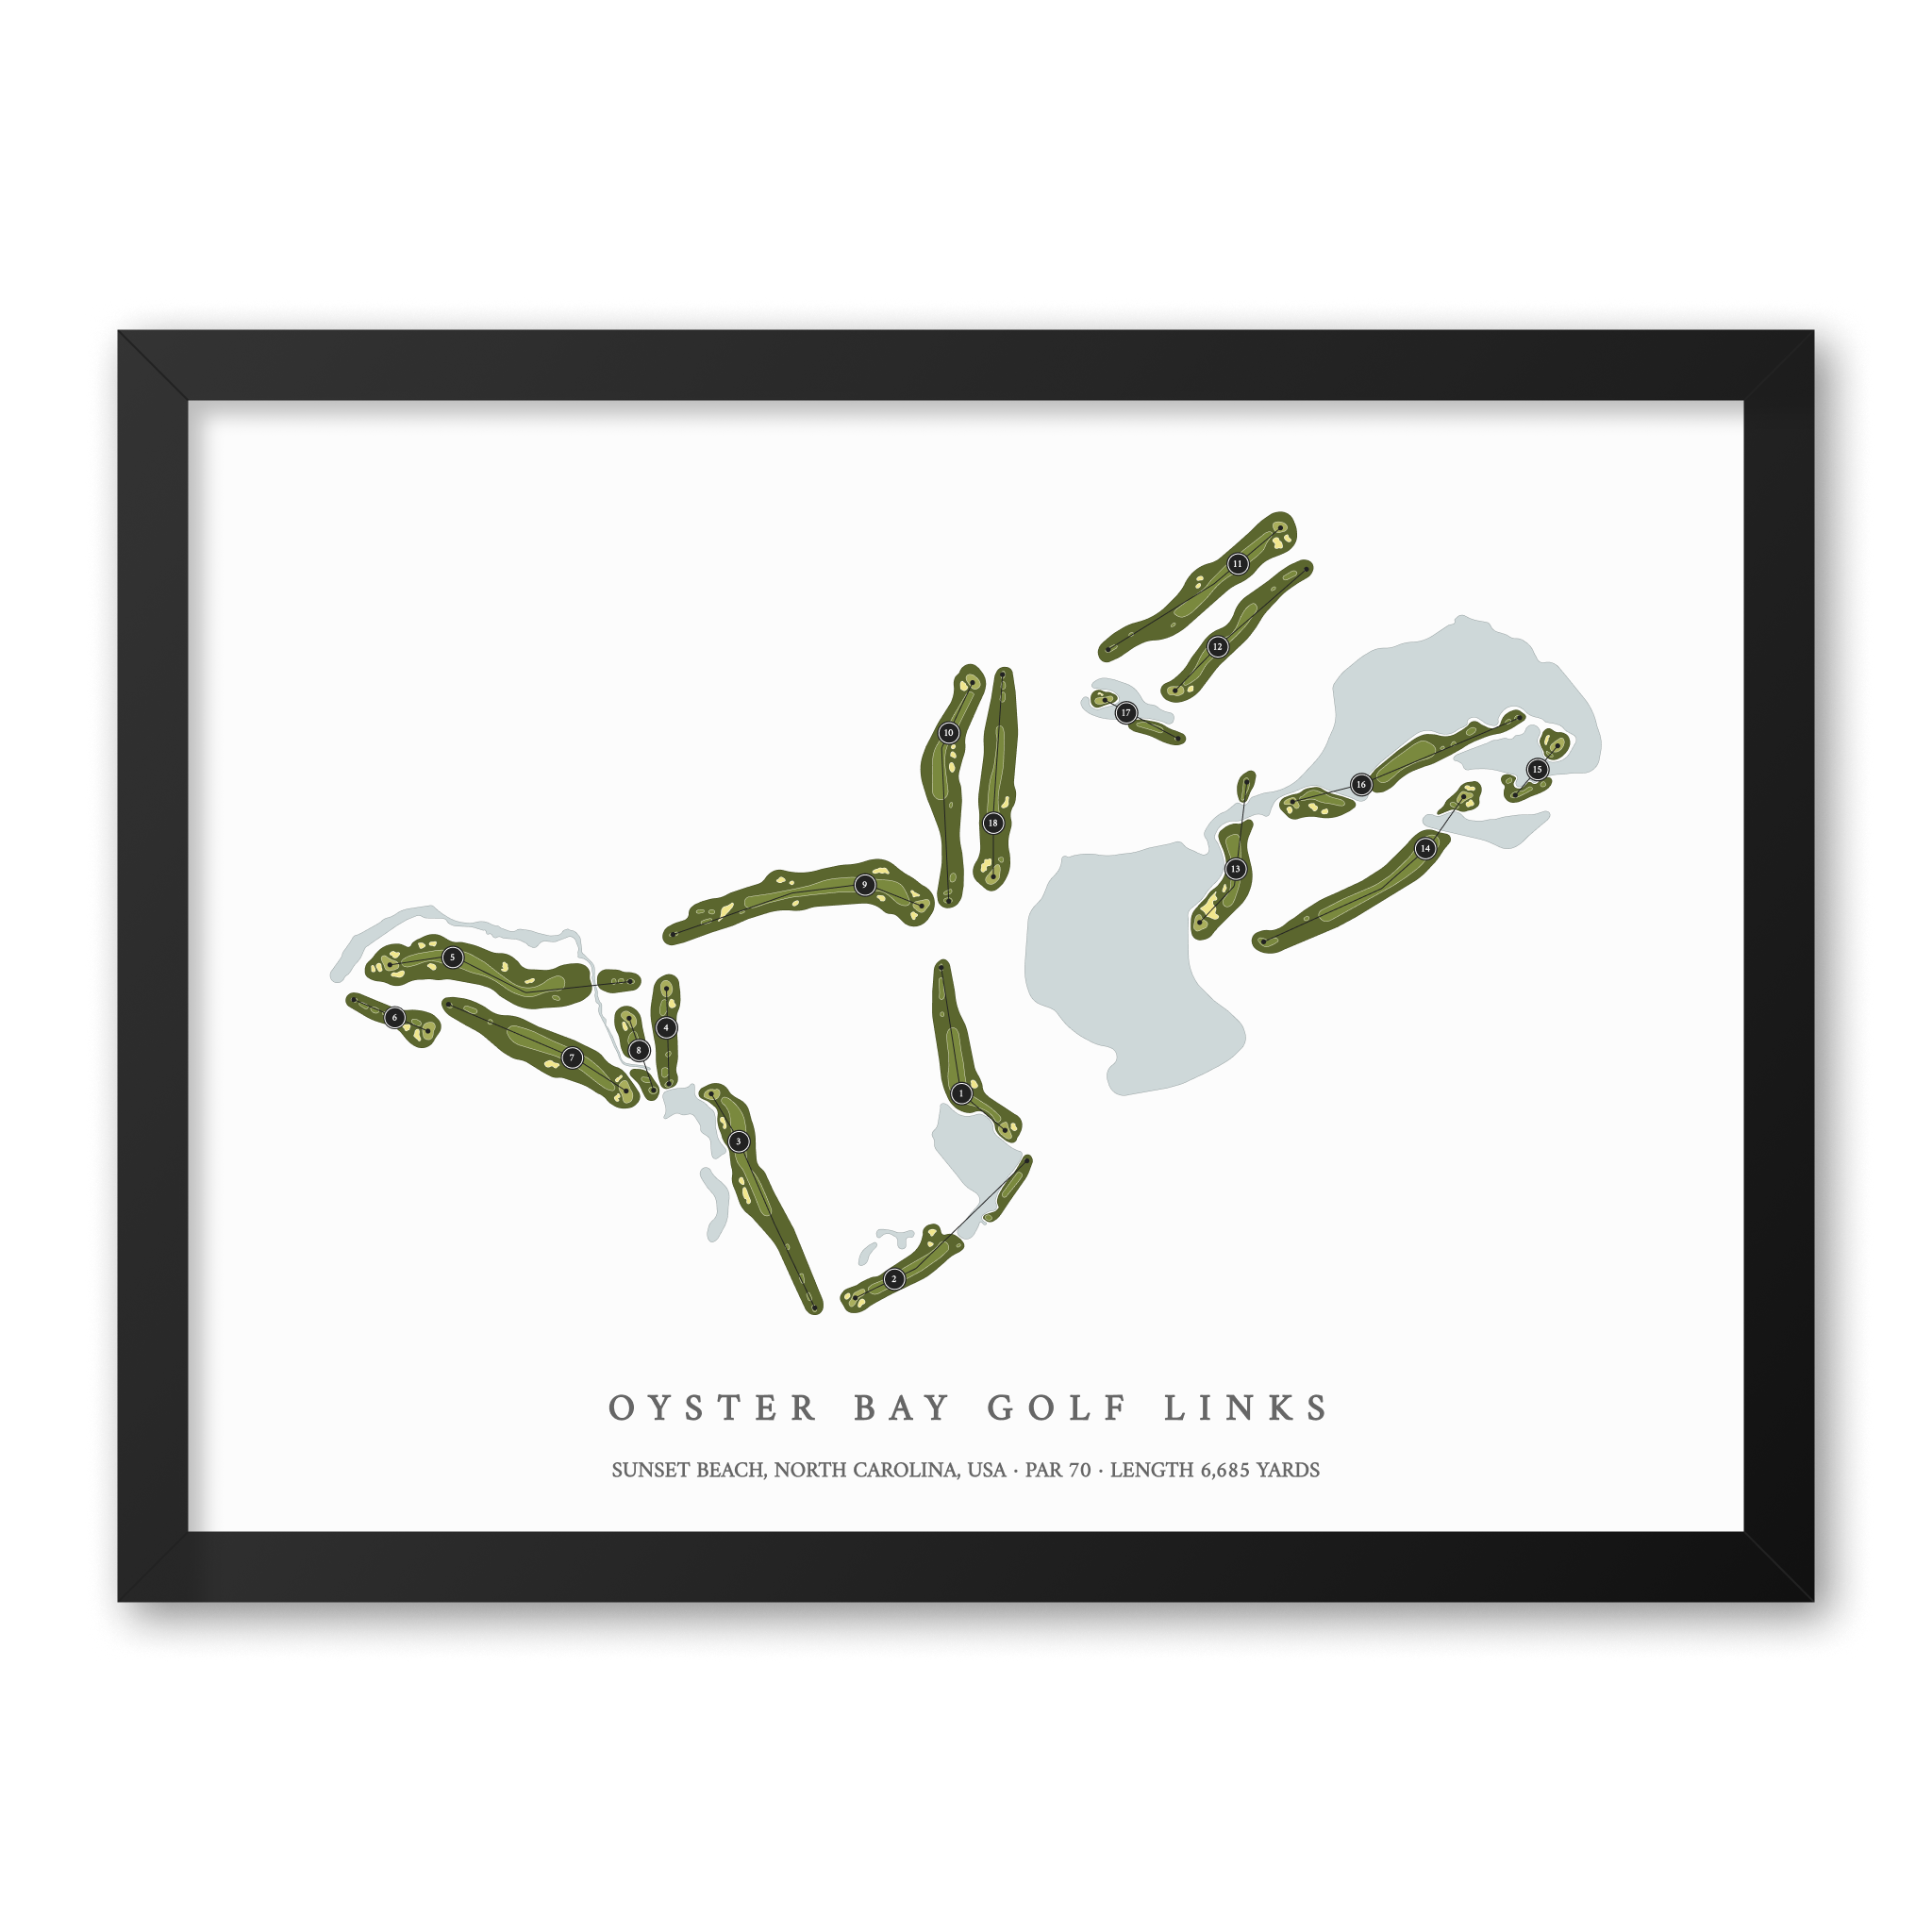 Oyster Bay Golf Links | Golf Course Map | Black Frame With Hole Numbers #hole numbers_yes